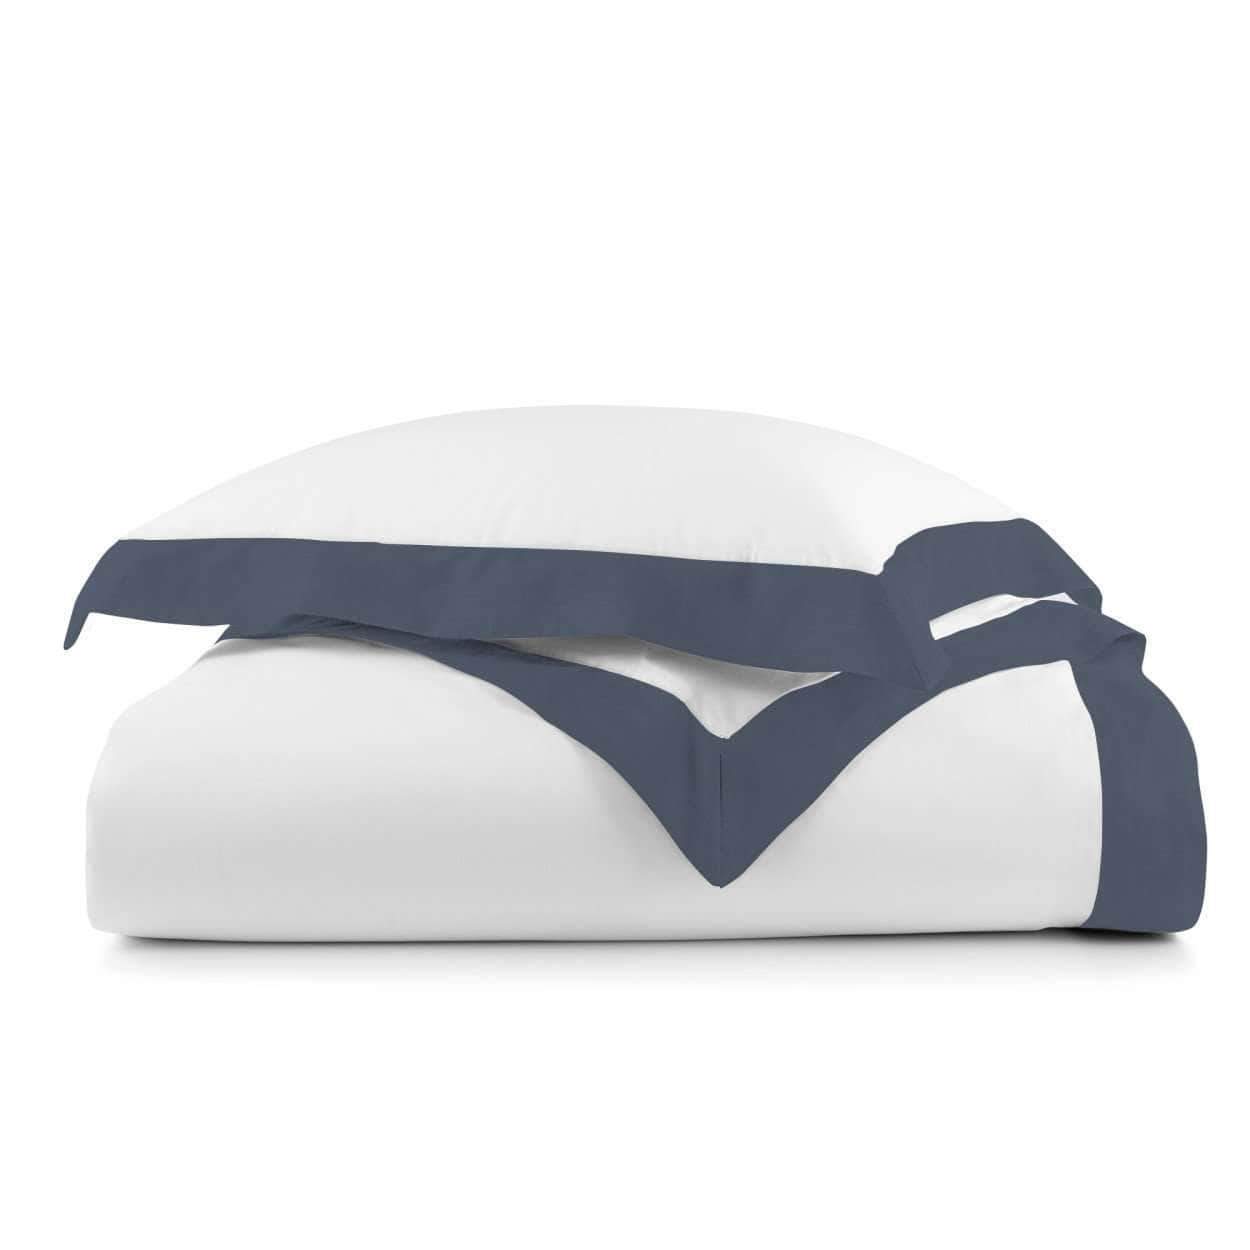 Duvet Covers Mandalay Linen Cuff Duvet Cover by Peacock Alley Twin / Navy Peacock Alley